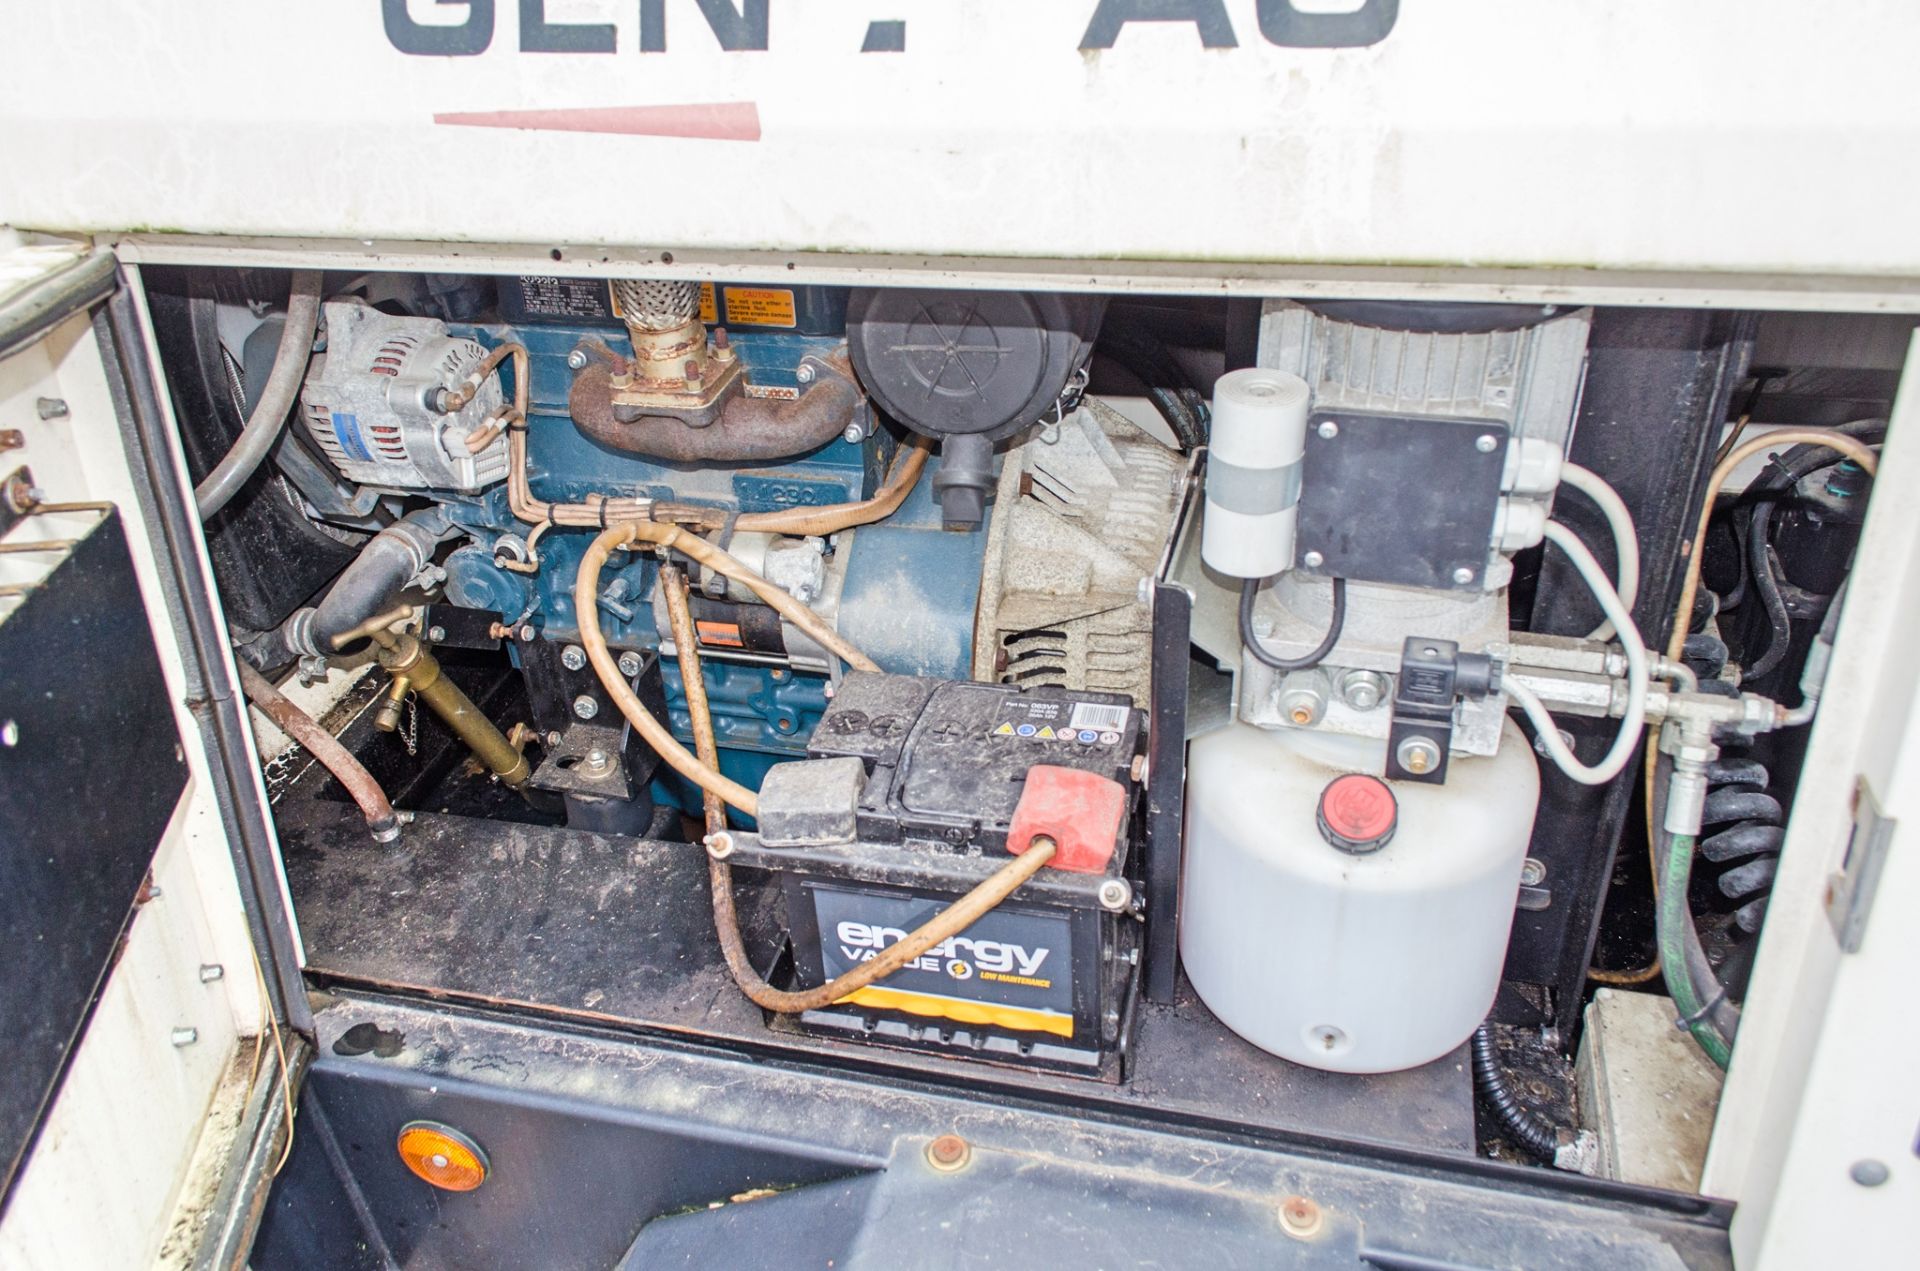 Generac VT-1 fast tow diesel driven tower light Year: 2016 S/N 1604285 Recorded hours: 1751 A753983 - Image 9 of 9